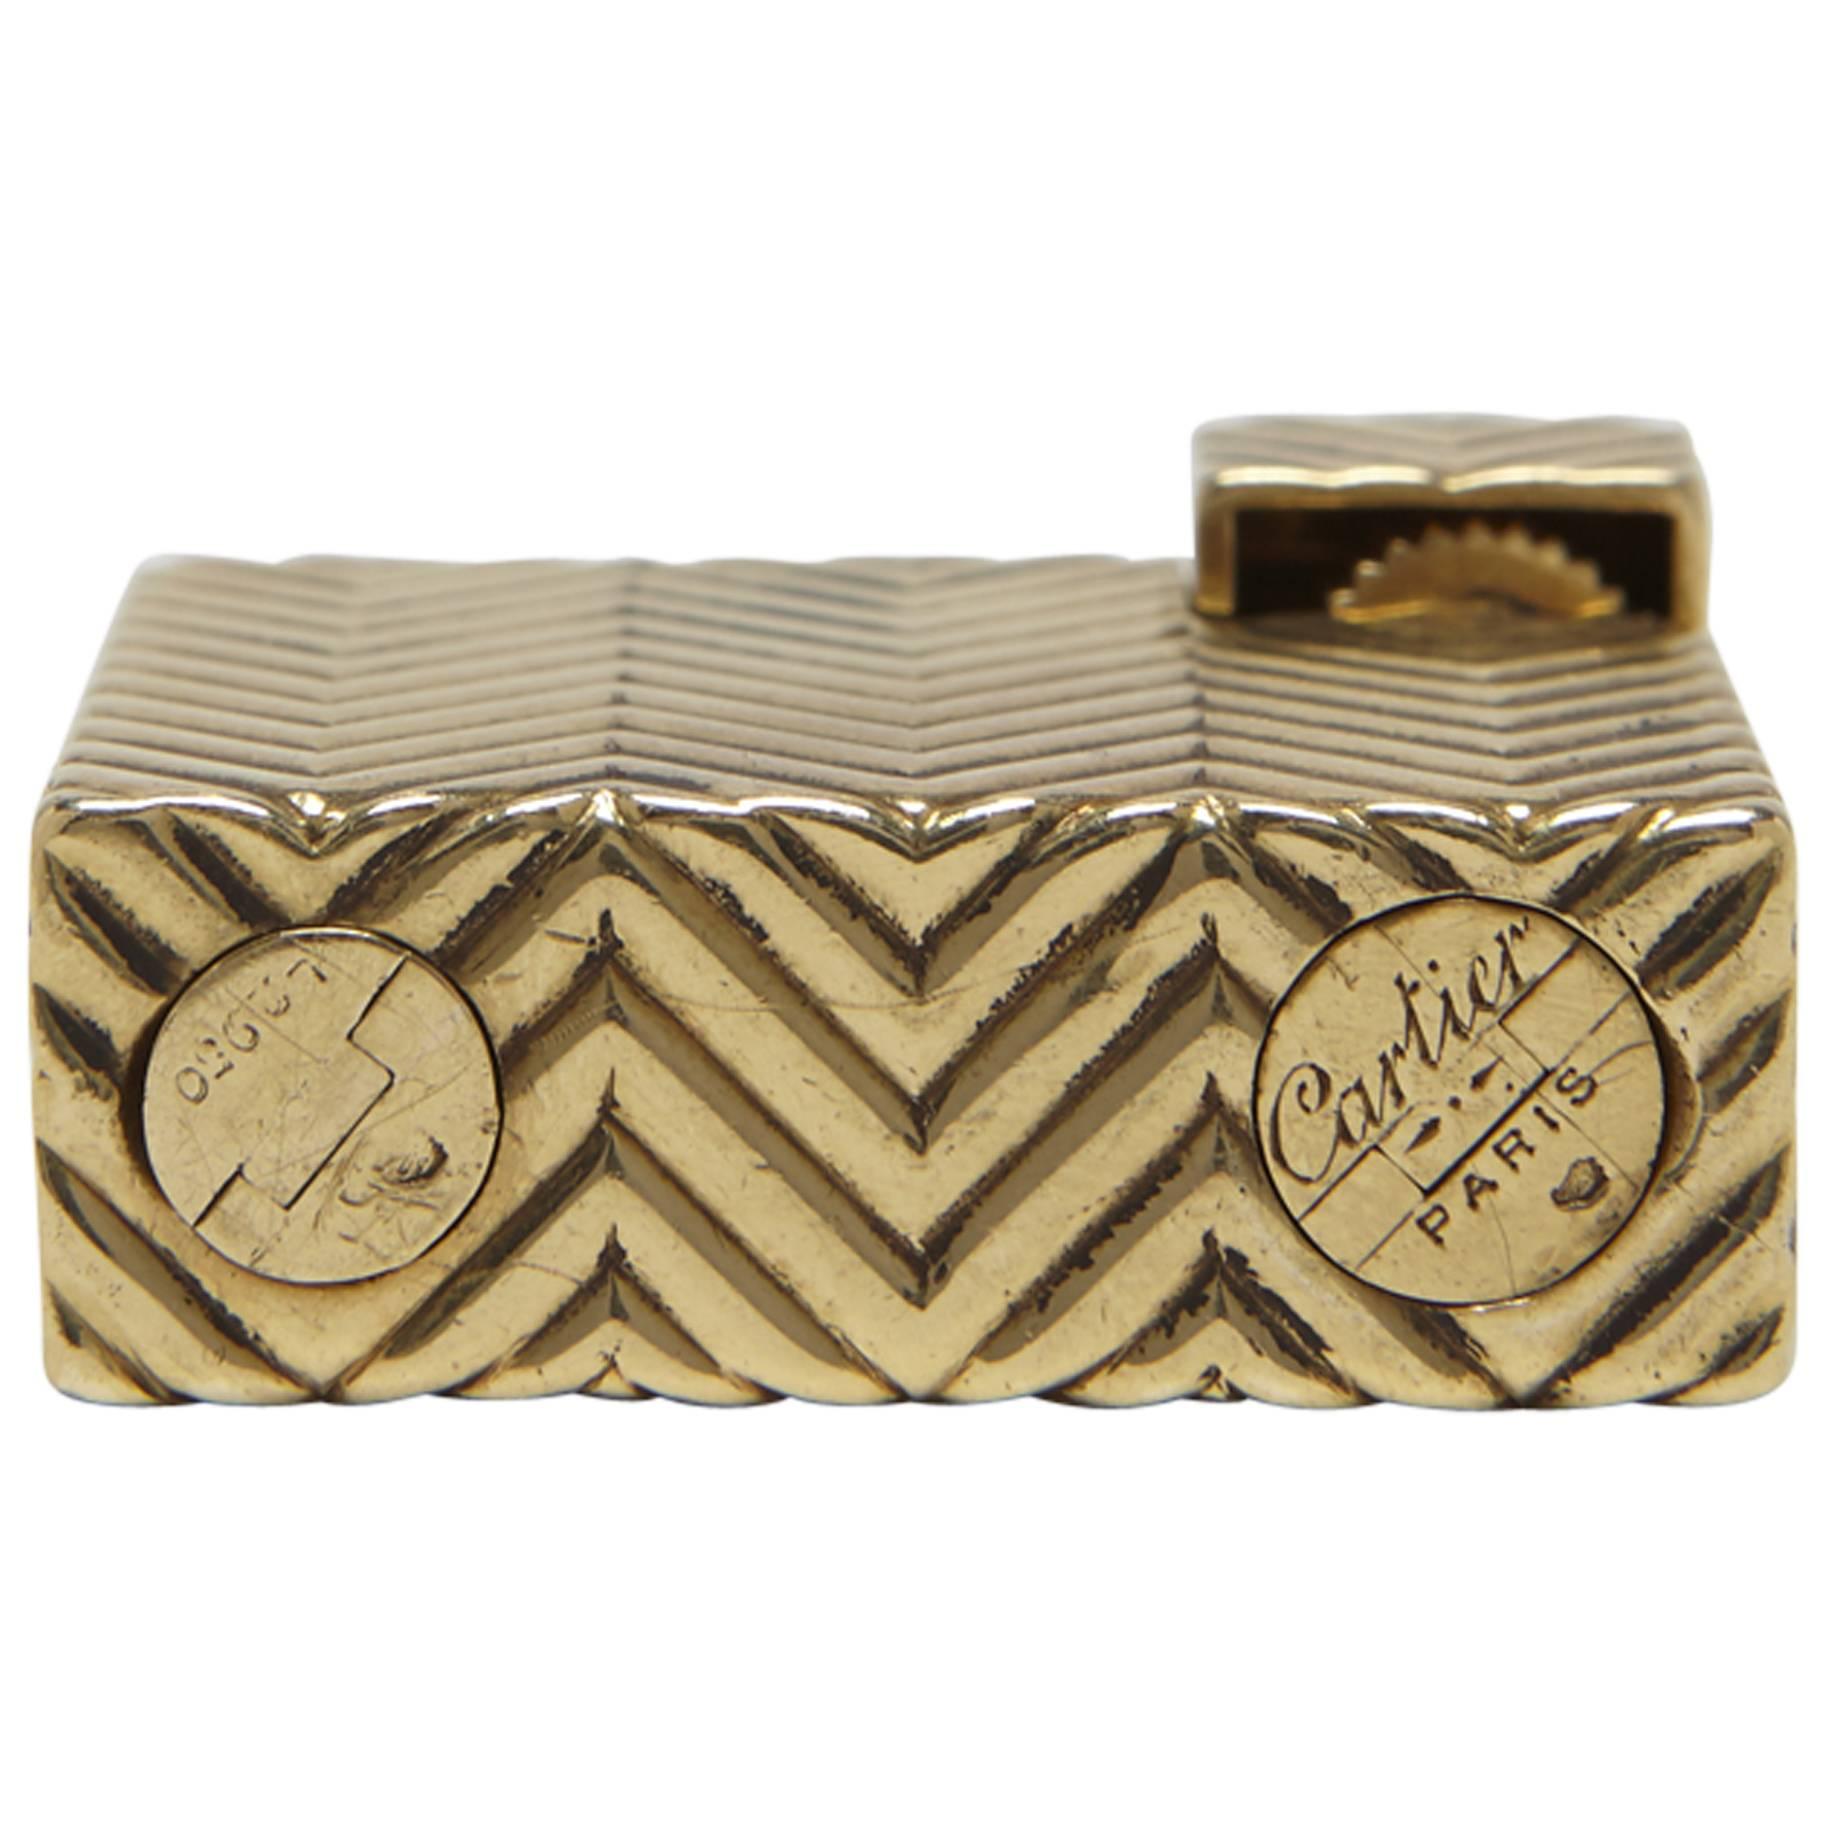 A very rare Cartier Art Deco solid 18-carat gold petrol wick lighter. This is the smaller size model of Cartier's pocket lighter collection. The body of the lighter is fully covered in a herringbone pattern which masterfully continues throughout all